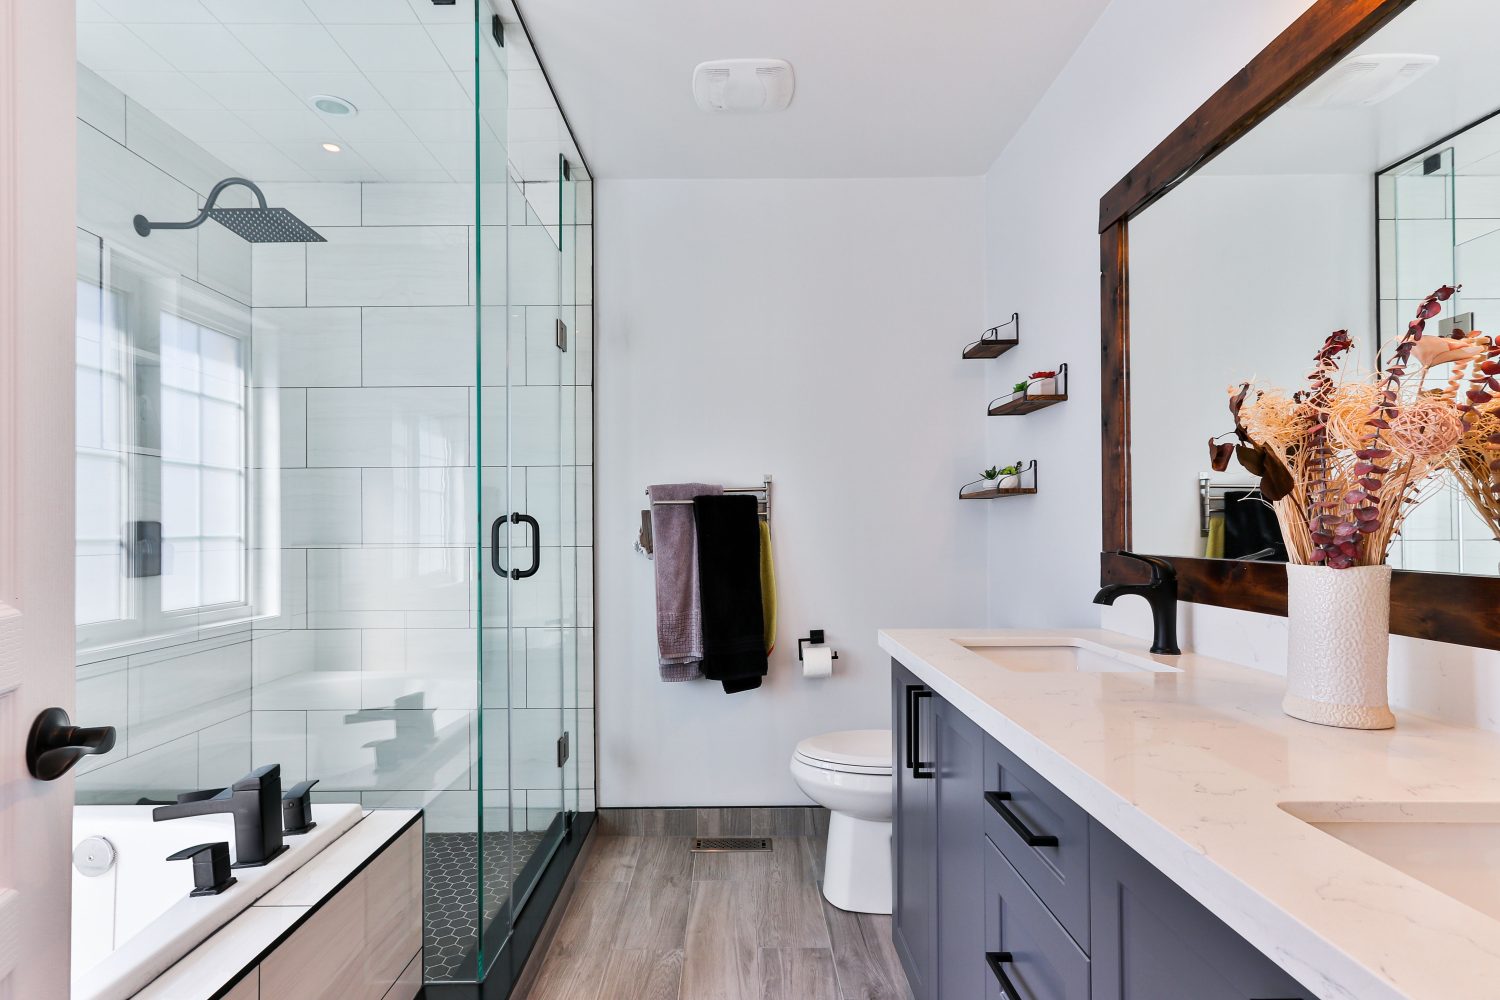 How Much Does A Bathroom Remodel Increase Home Value In 2023?